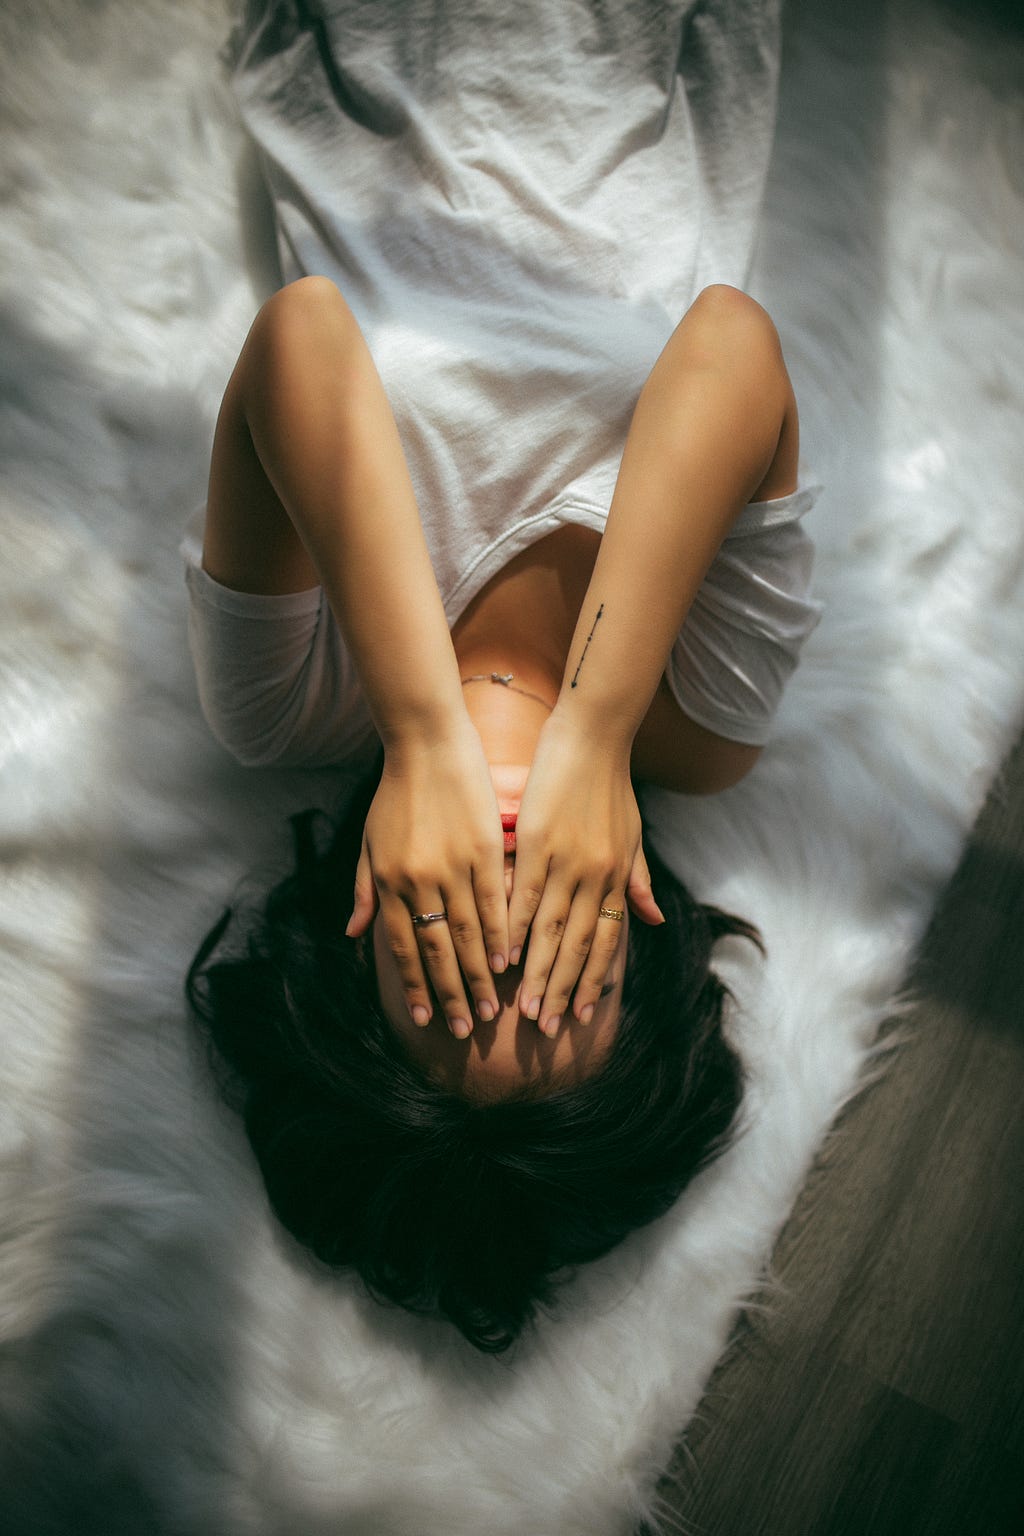 A picture of a women wearing a white t-shirt, laying on her bed, while covering her face with her eyes. Her bed was covered with some kind of an animal’s fur rug. The picture was taken upside-down, so the head is on the bottom of the picture.